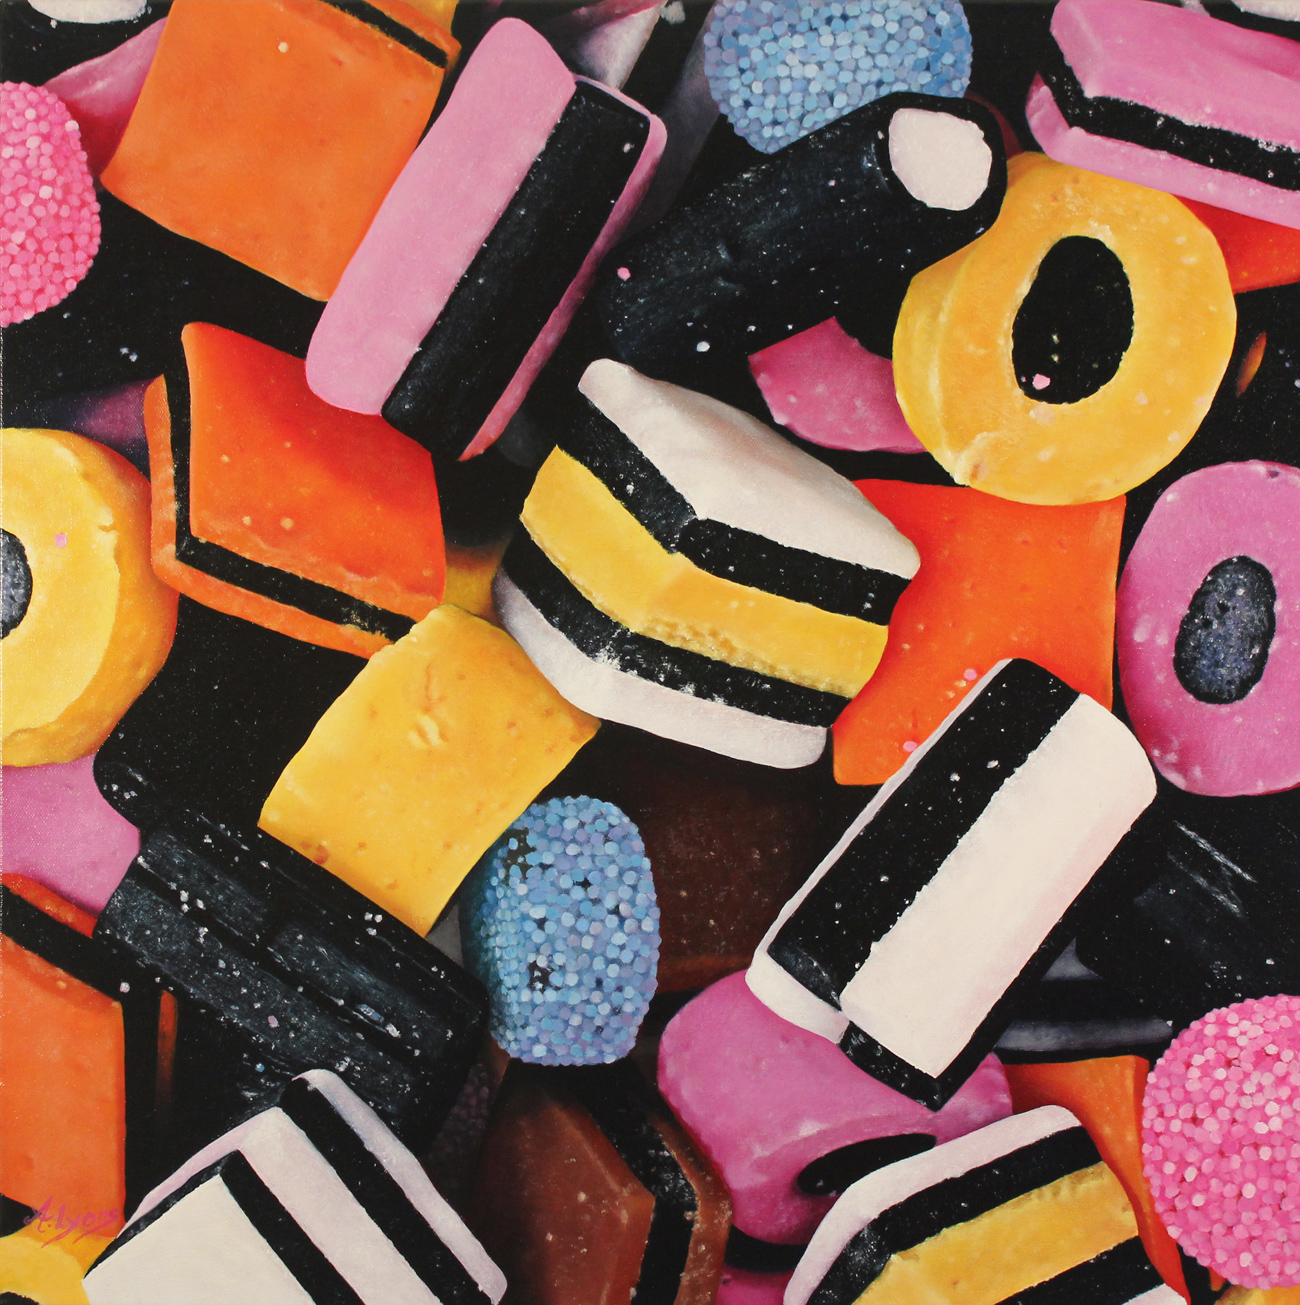 Angela Lyons, Original oil painting on canvas, Liquorice Allsorts. Click to enlarge